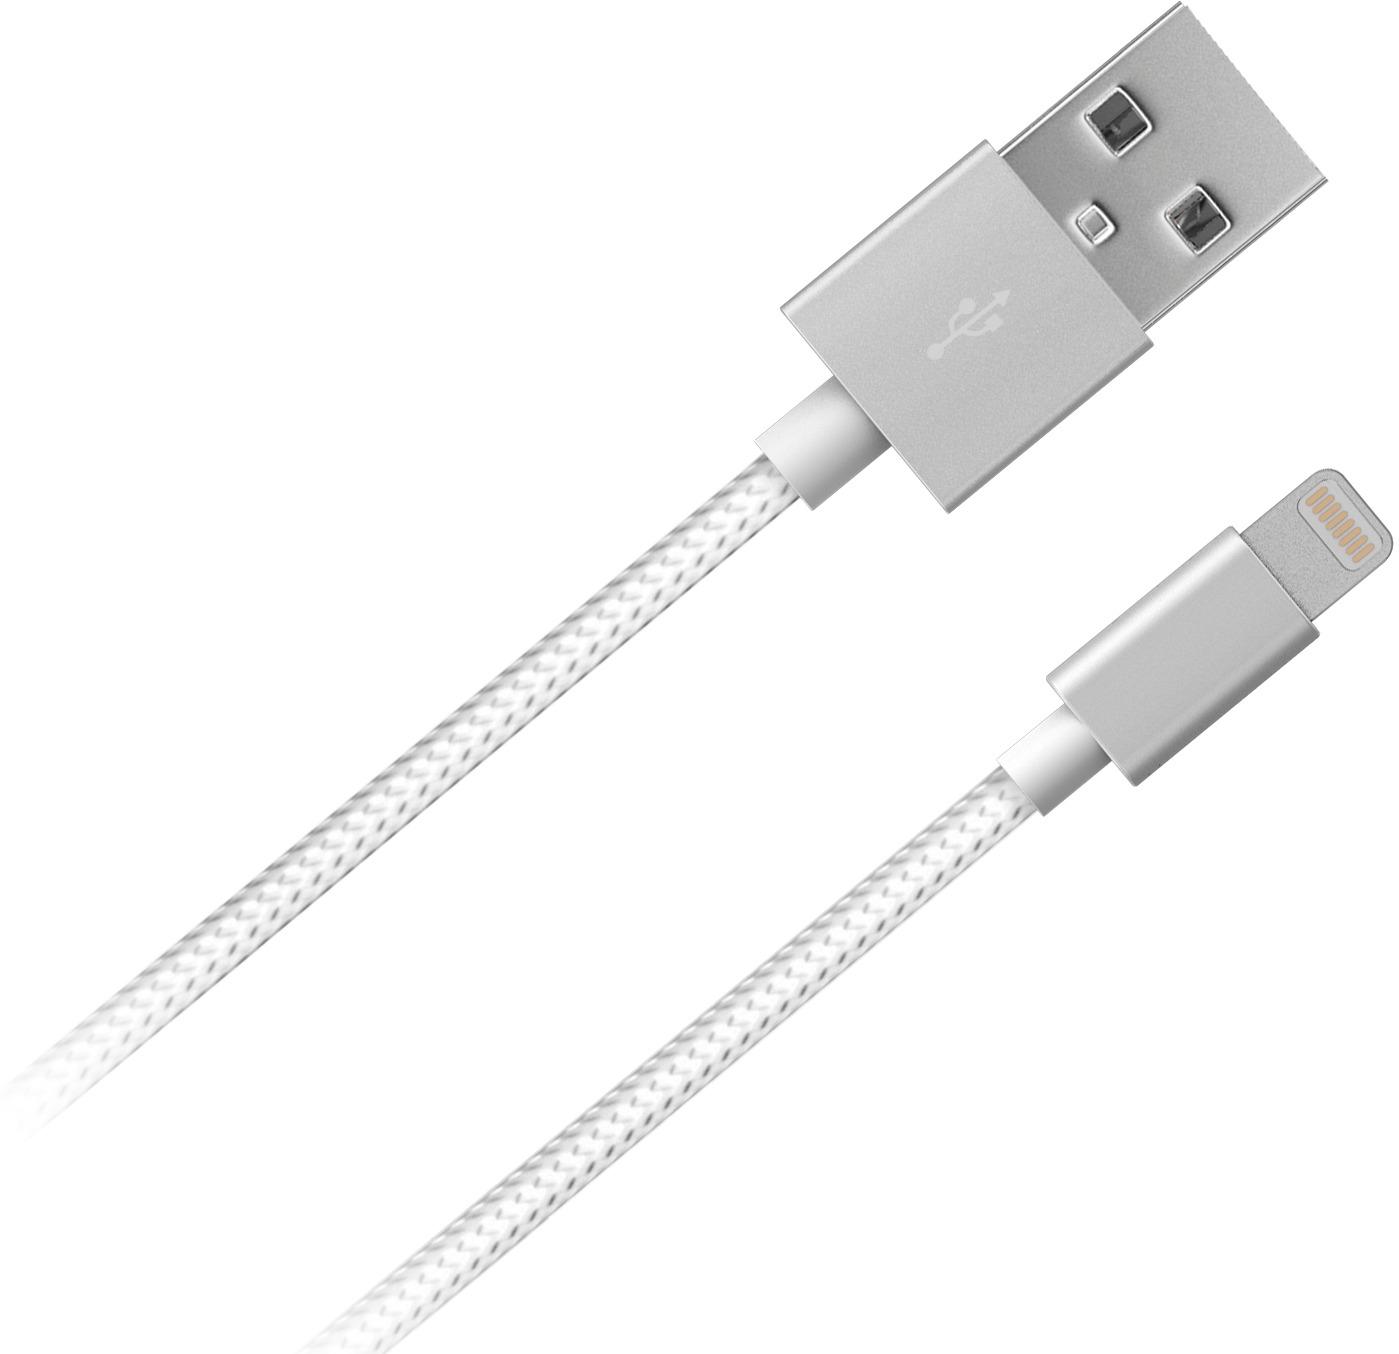 10ft Apple Lightning Cable Just Wireless